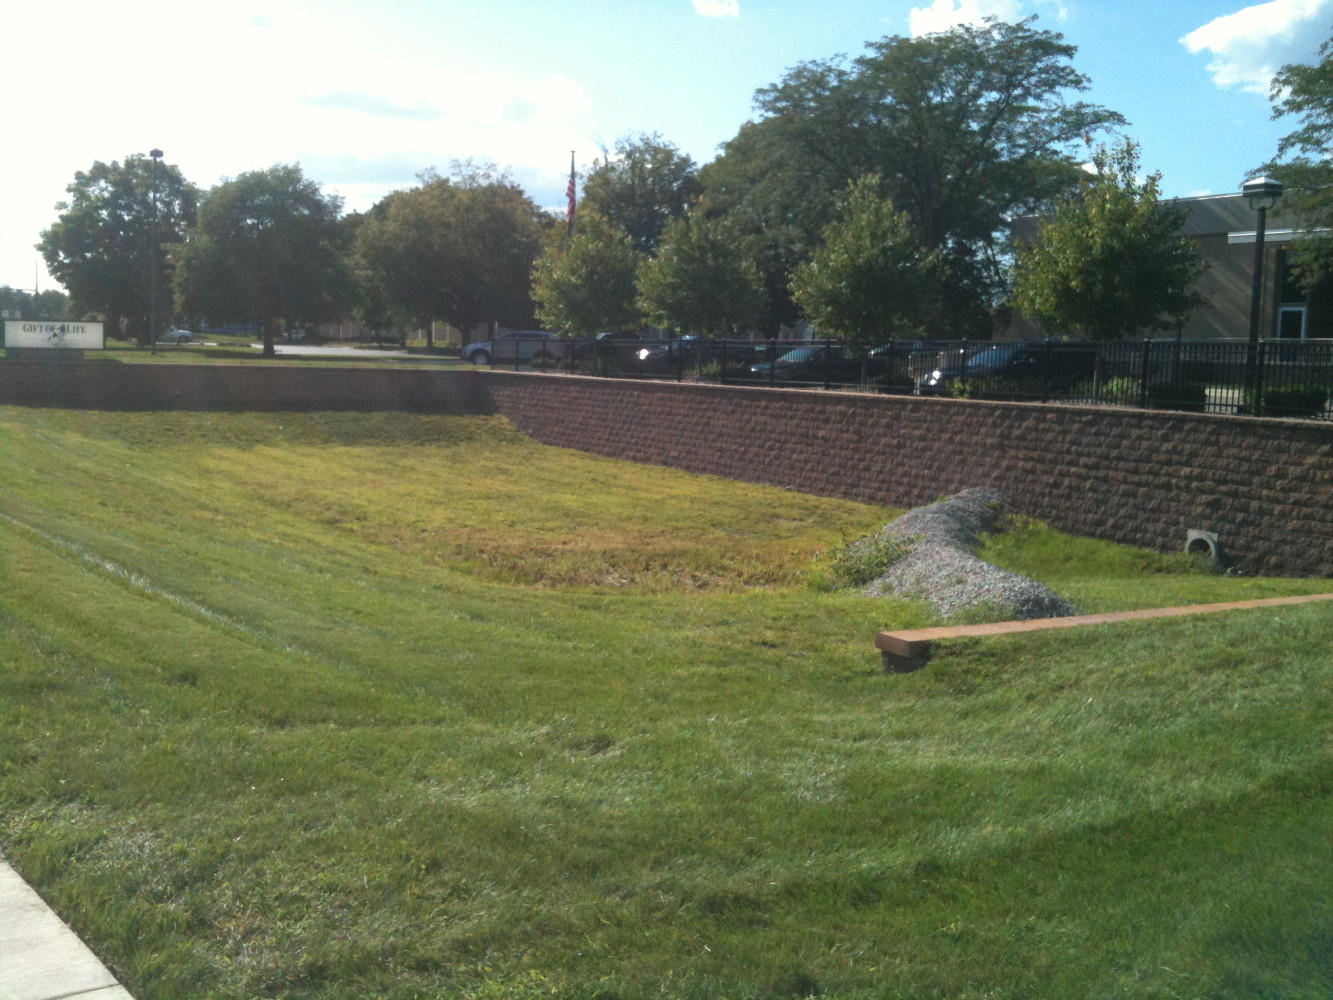 Commercial Keystone wall at the Gift of LIfe property was engineered to retain the parking lot.